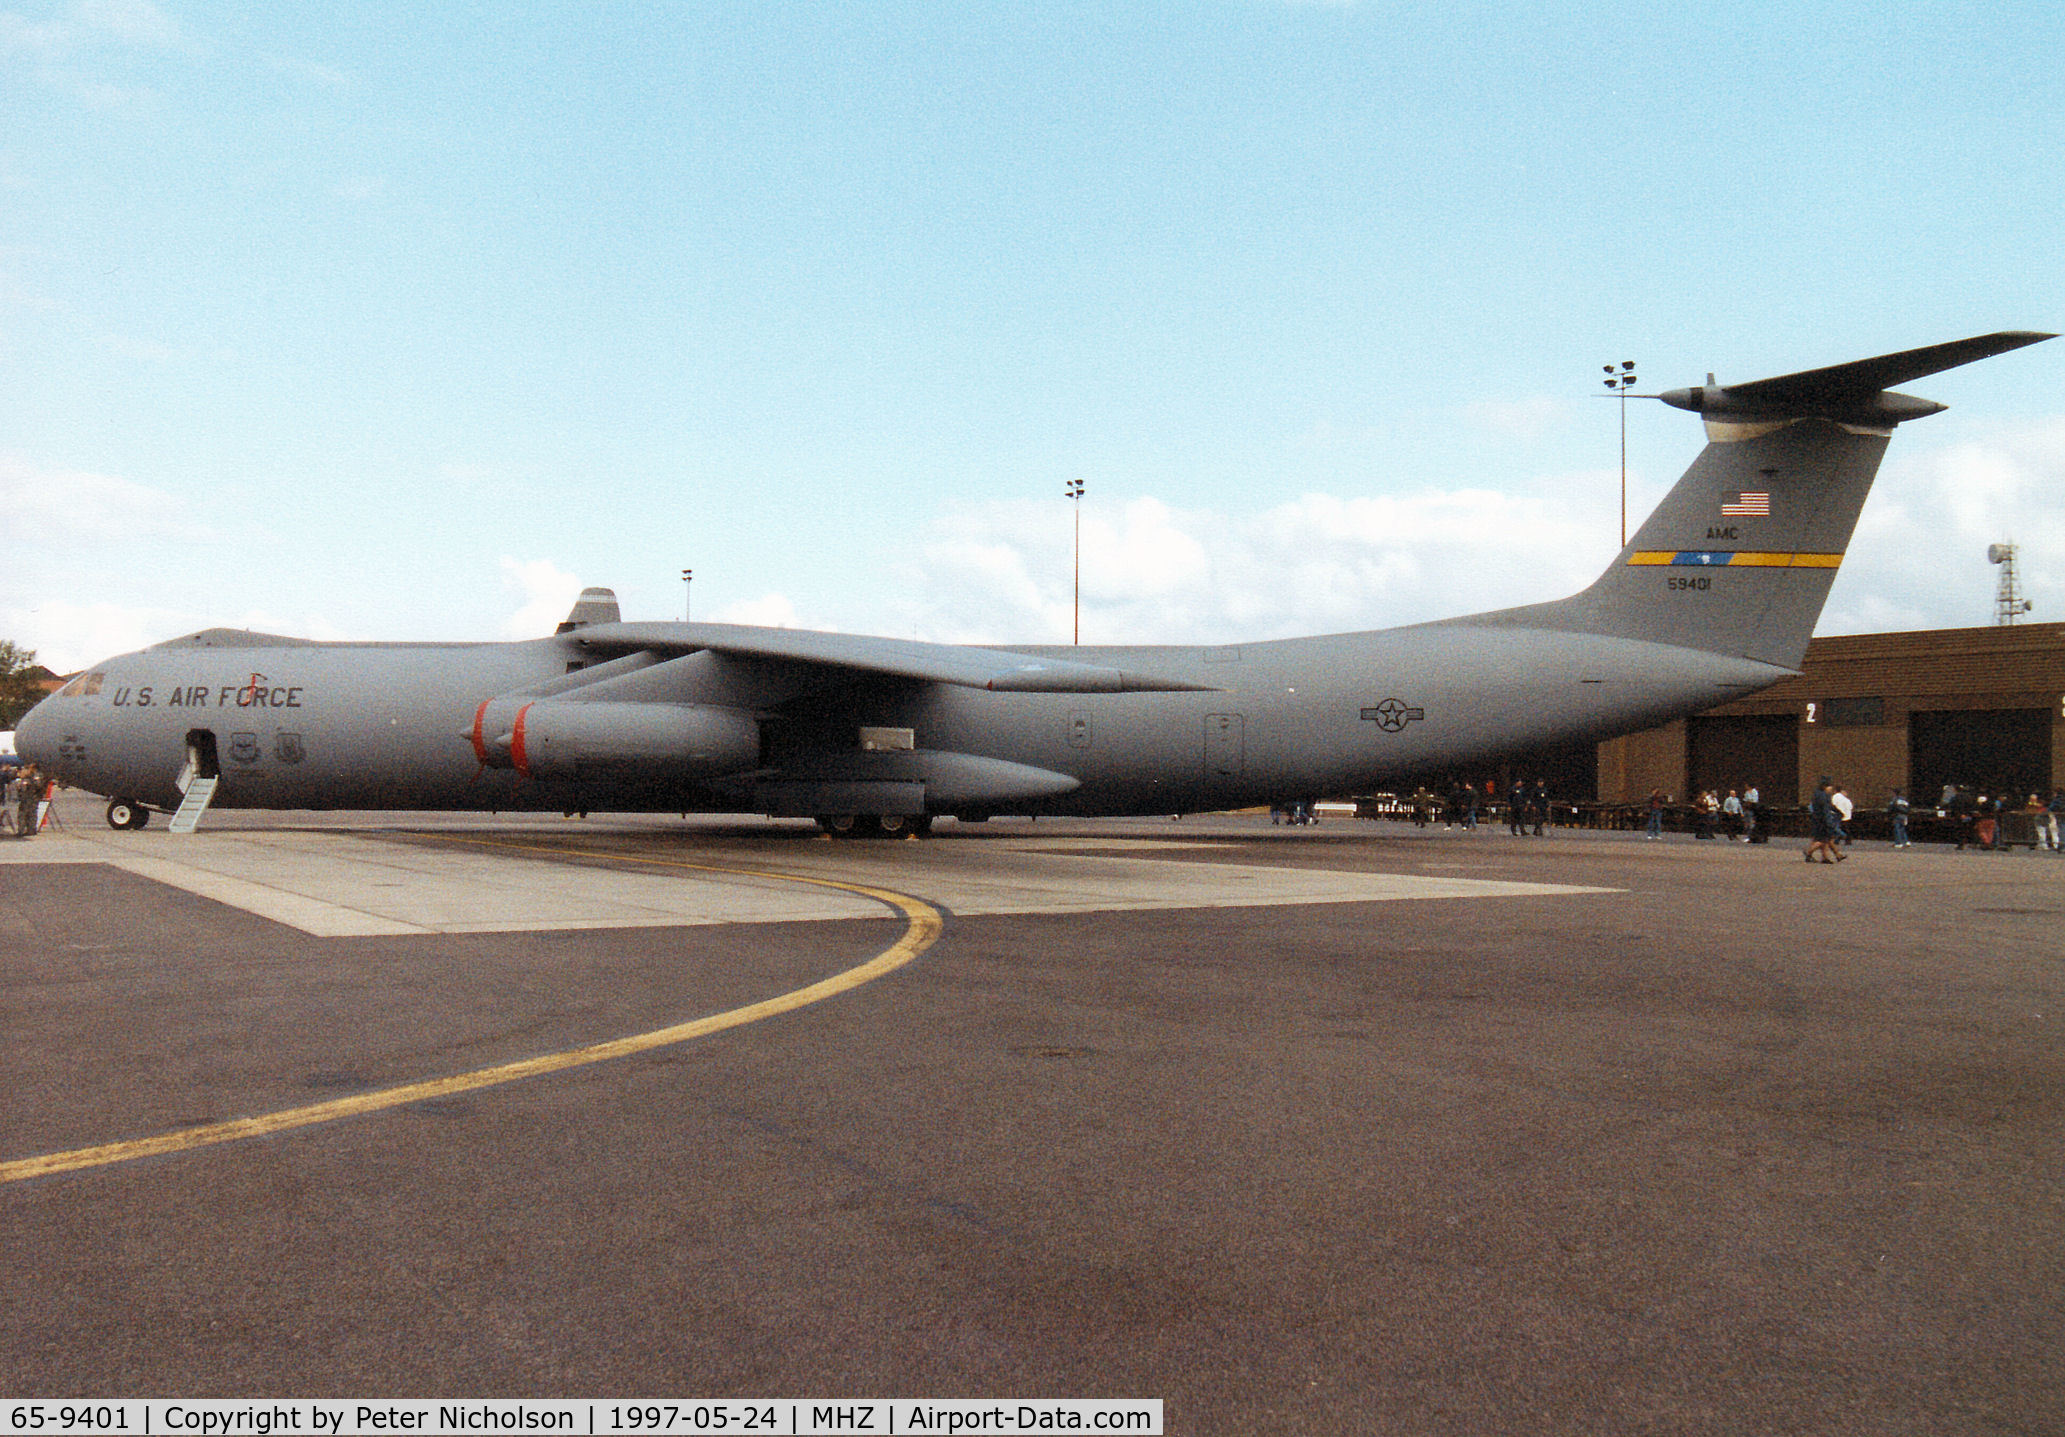 65-9401, 1965 Lockheed C-141B Starlifter C/N 300-6138, C-141B Starlifter, callsign Reach 5401, of the 437th Airlift Wing at Charleston AFB on display at the 1997 RAF Mildenhall Air Fete.